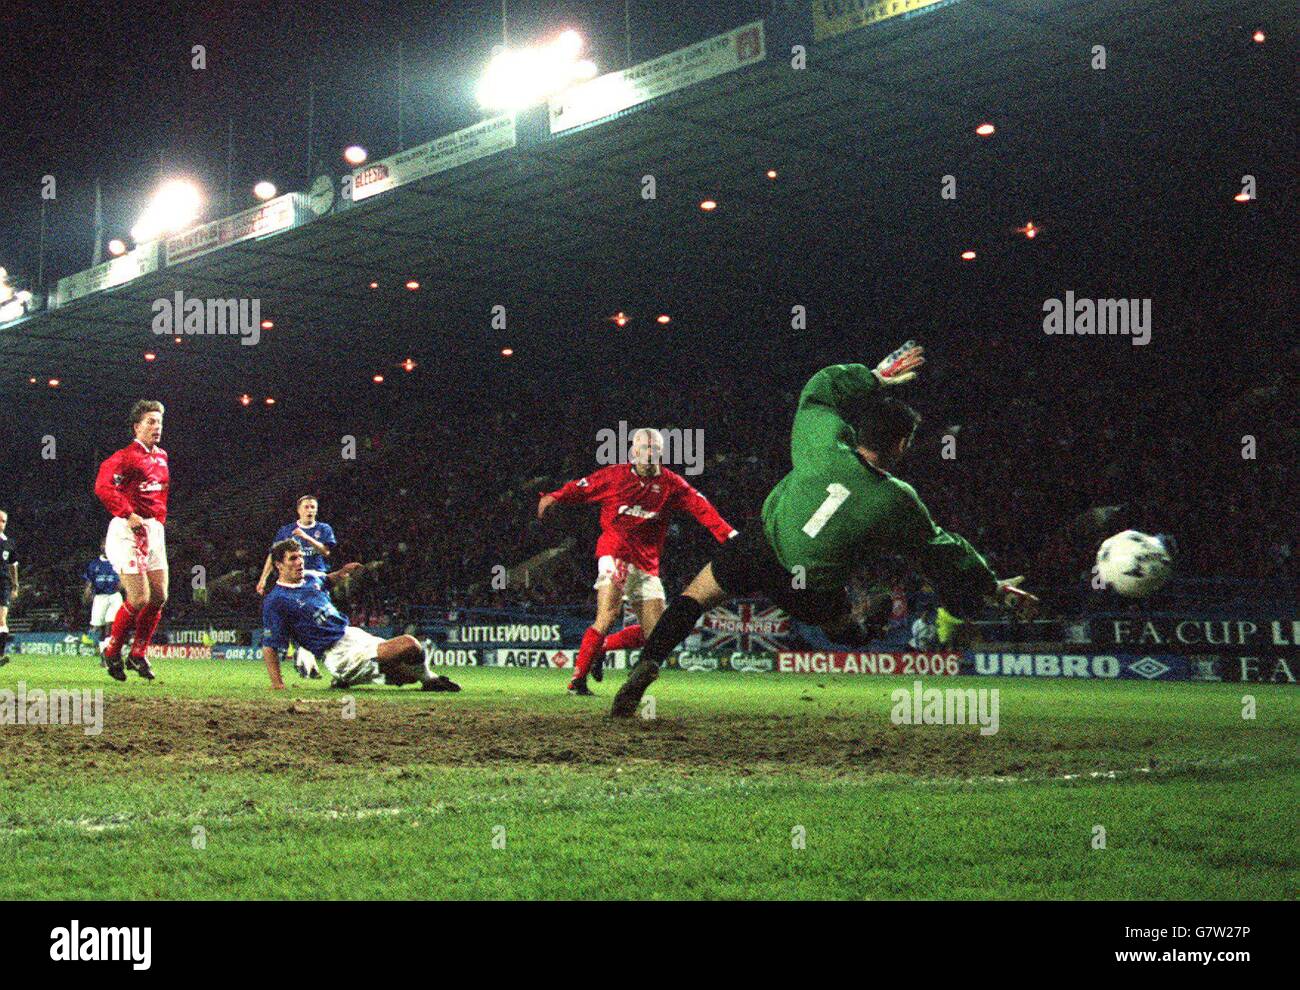 Soccer - Littlewoods F.A.Cup Semi Final - Chesterfield v Middlesbrough Stock Photo